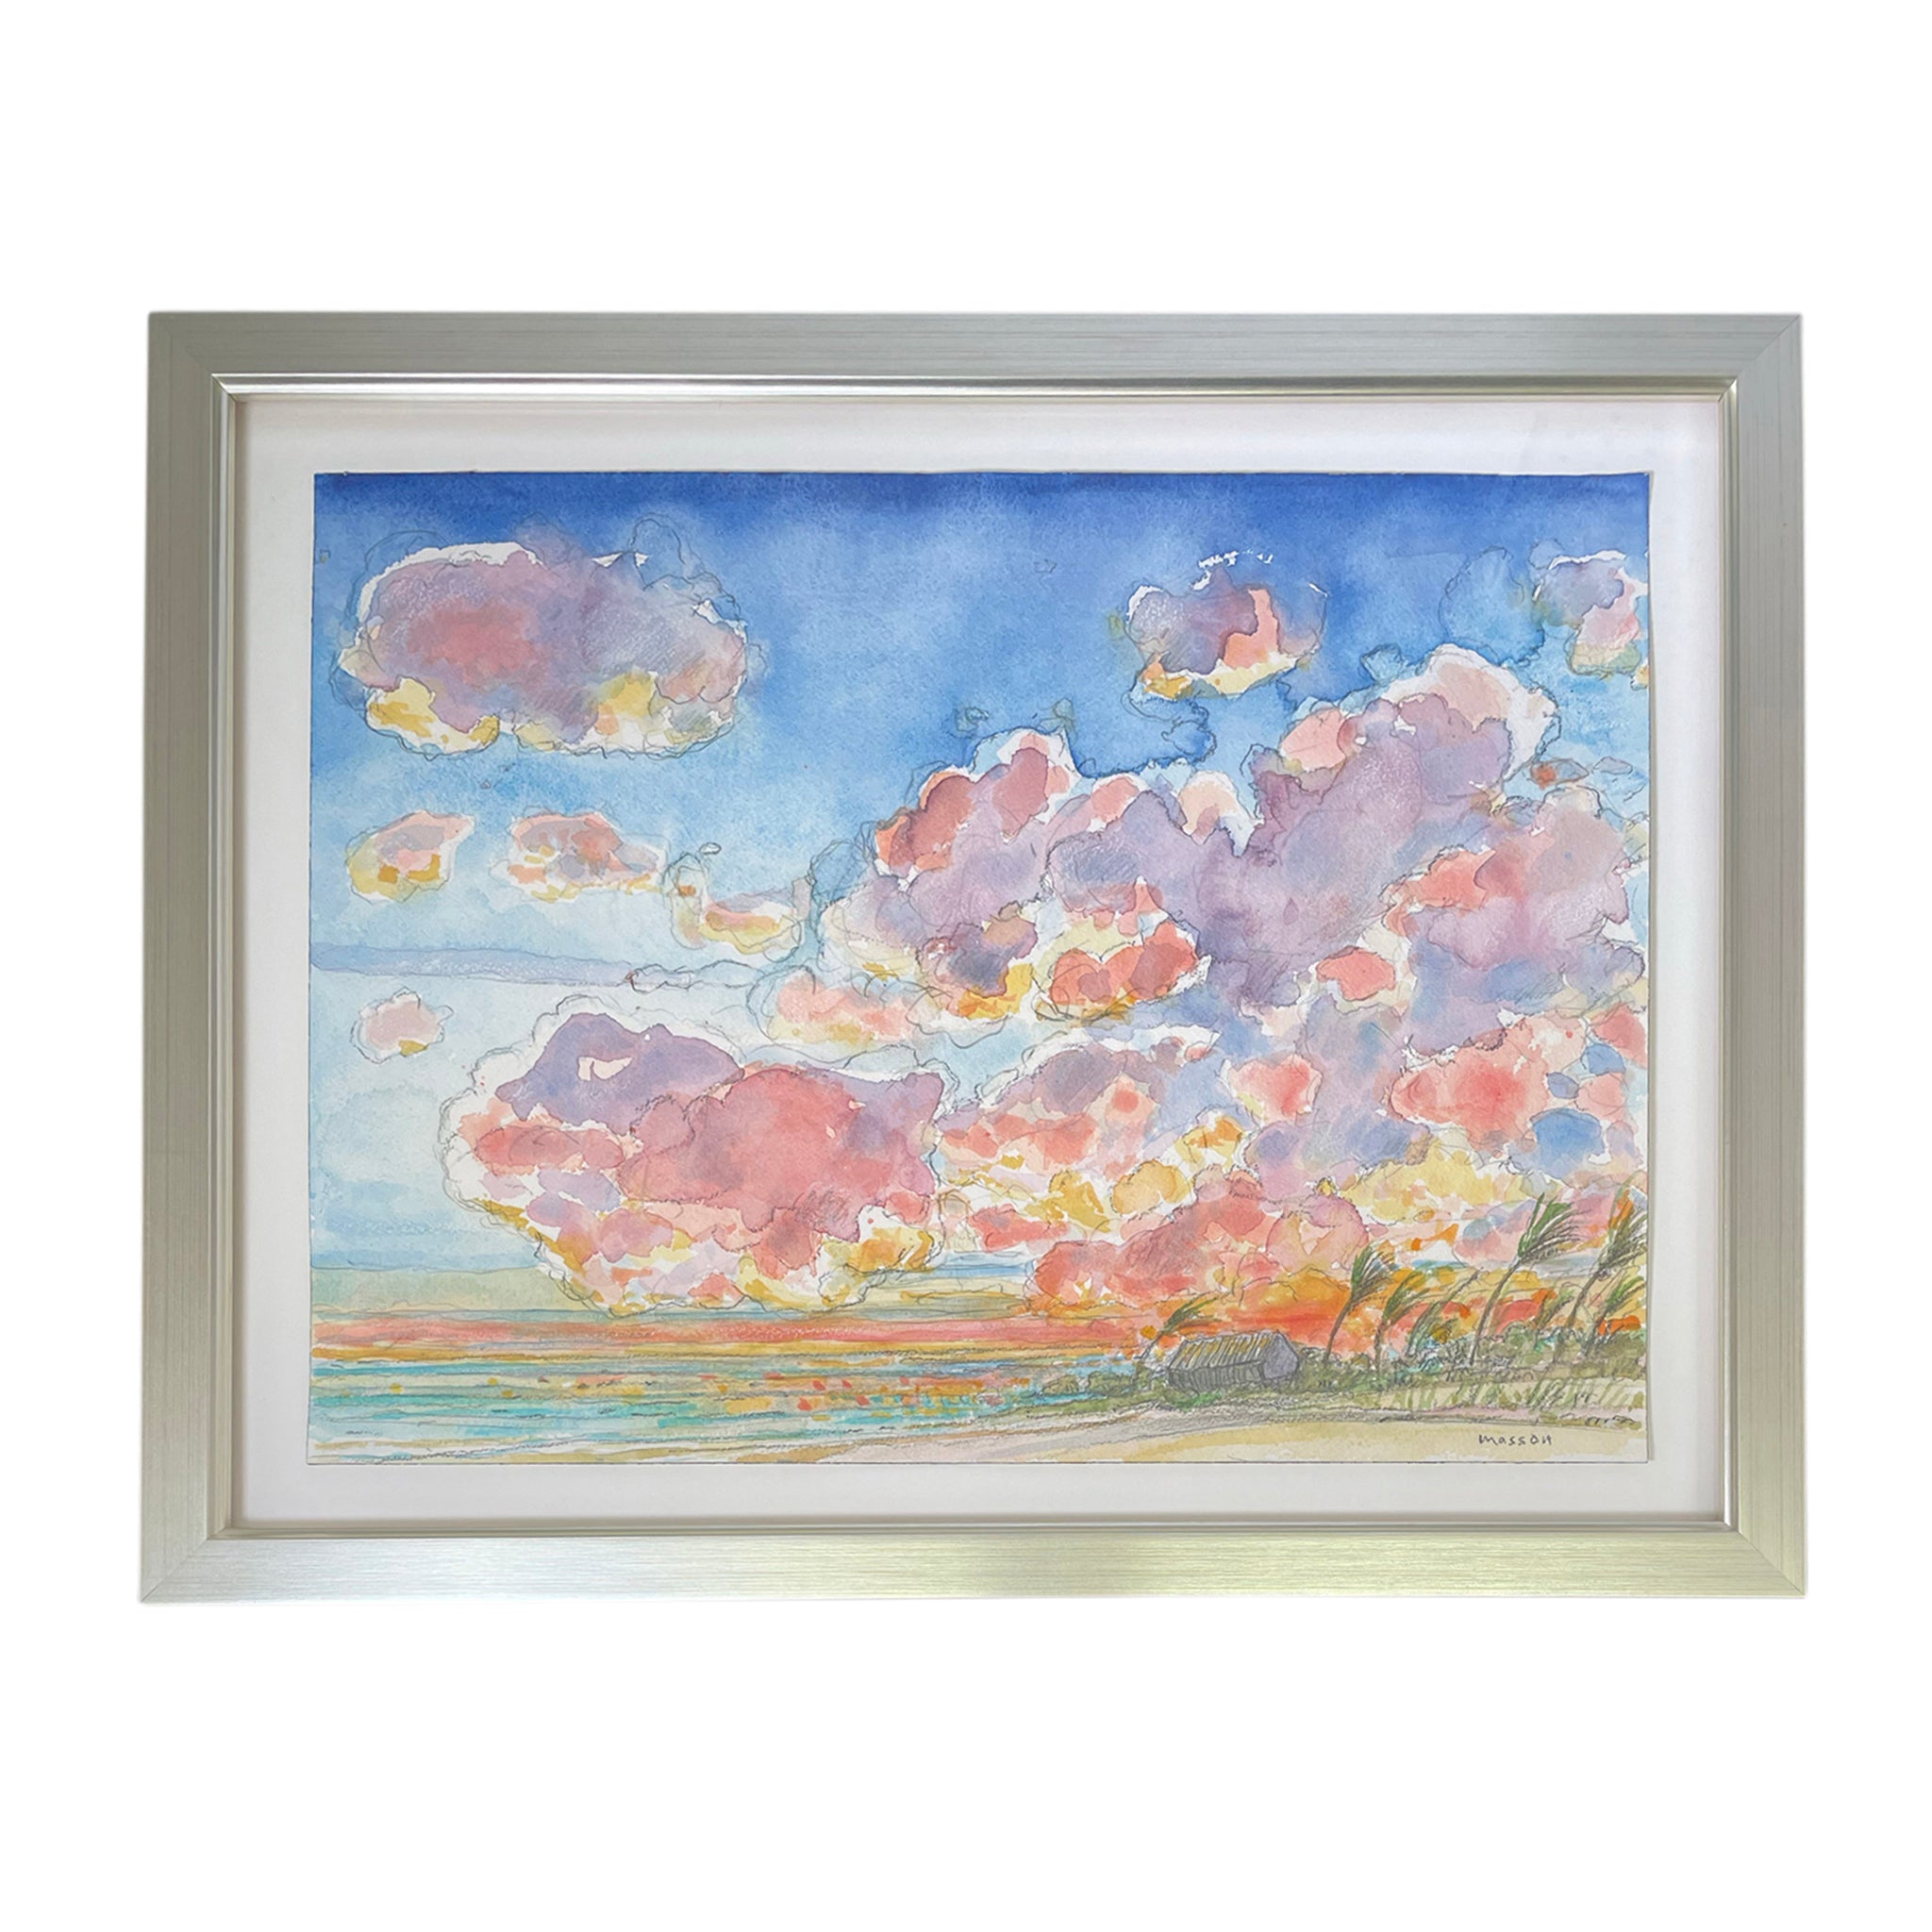 Charles Masson, Summer Clouds